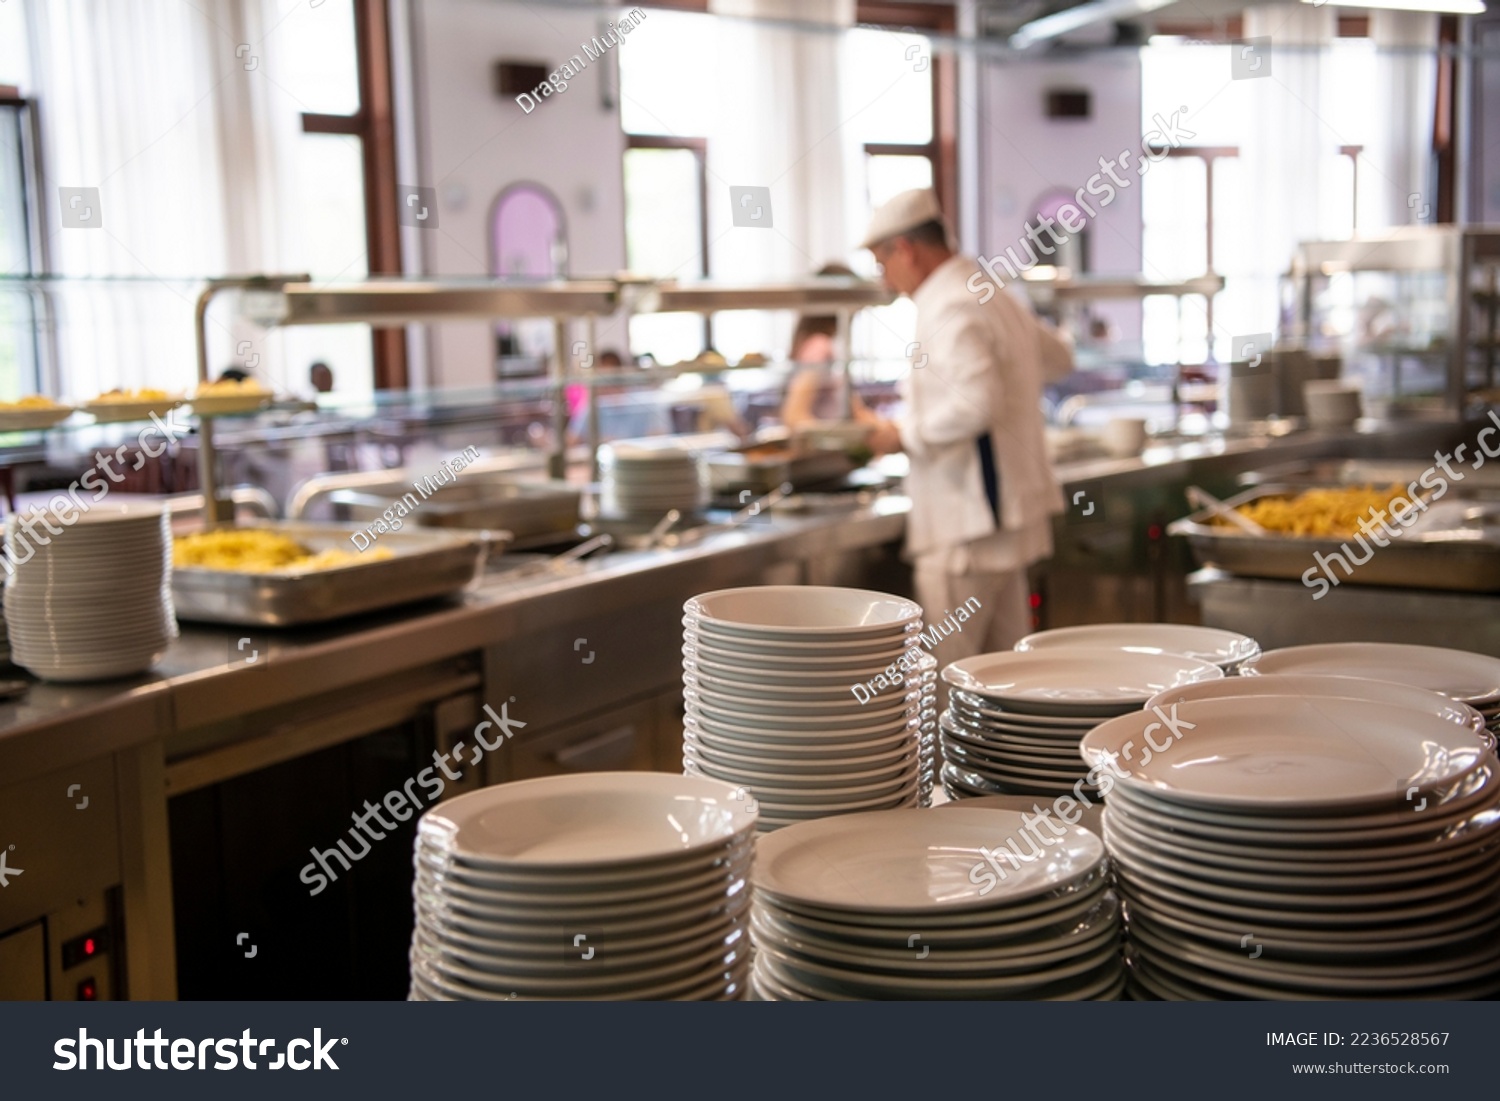 A pile of plates infront of Staff worker preparing food for students in school canteen. Lunch break. Education people and students school cafeteria. Belgrade, Serbia 17.05.2022
 #2236528567